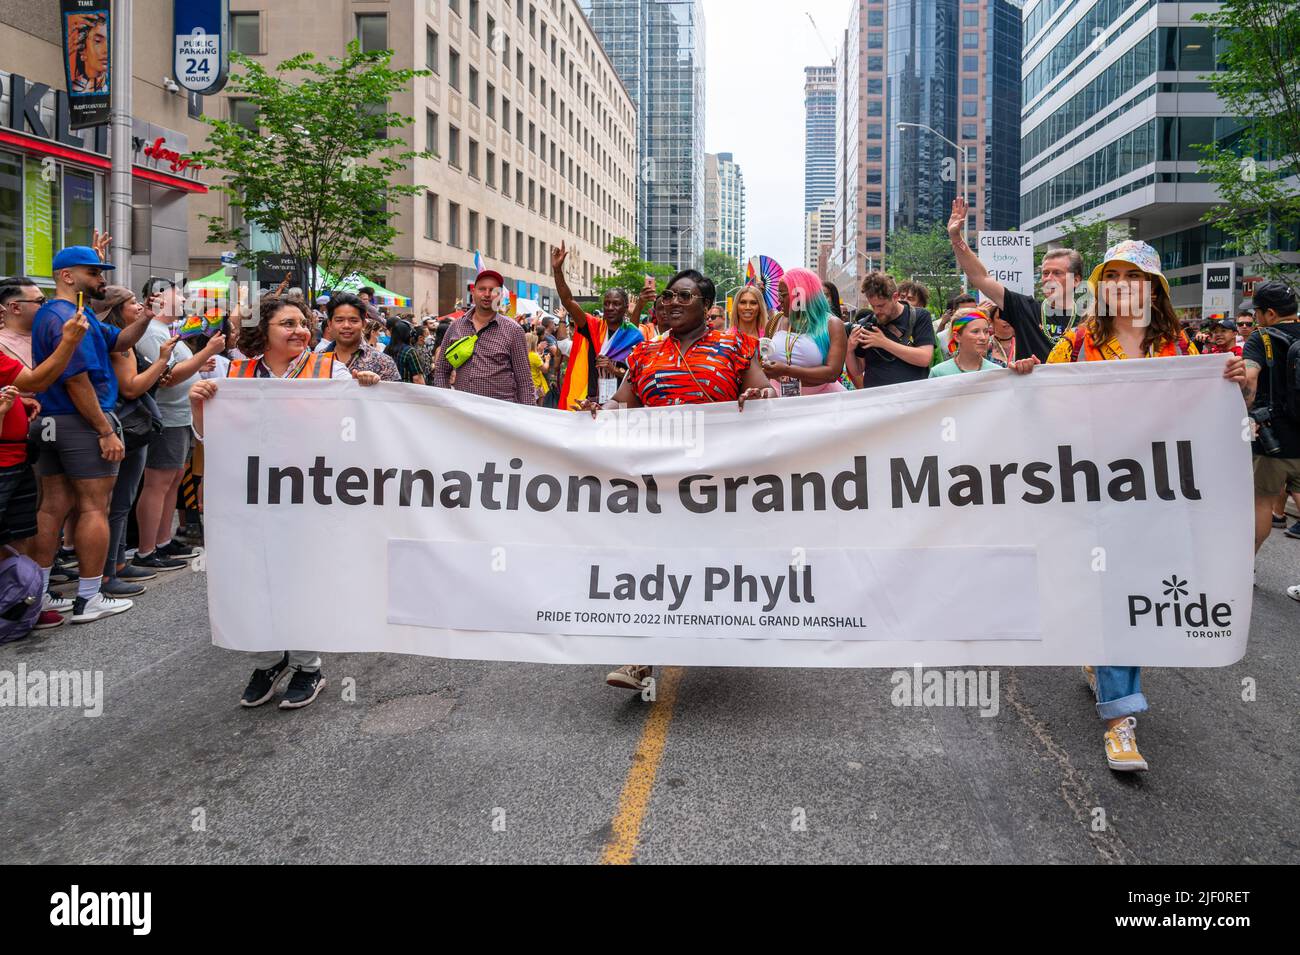 Group of people behind a banner announcing Lady Phyll as International Grand Marshal. They are marching in Bloor Street during Pride Parade Stock Photo